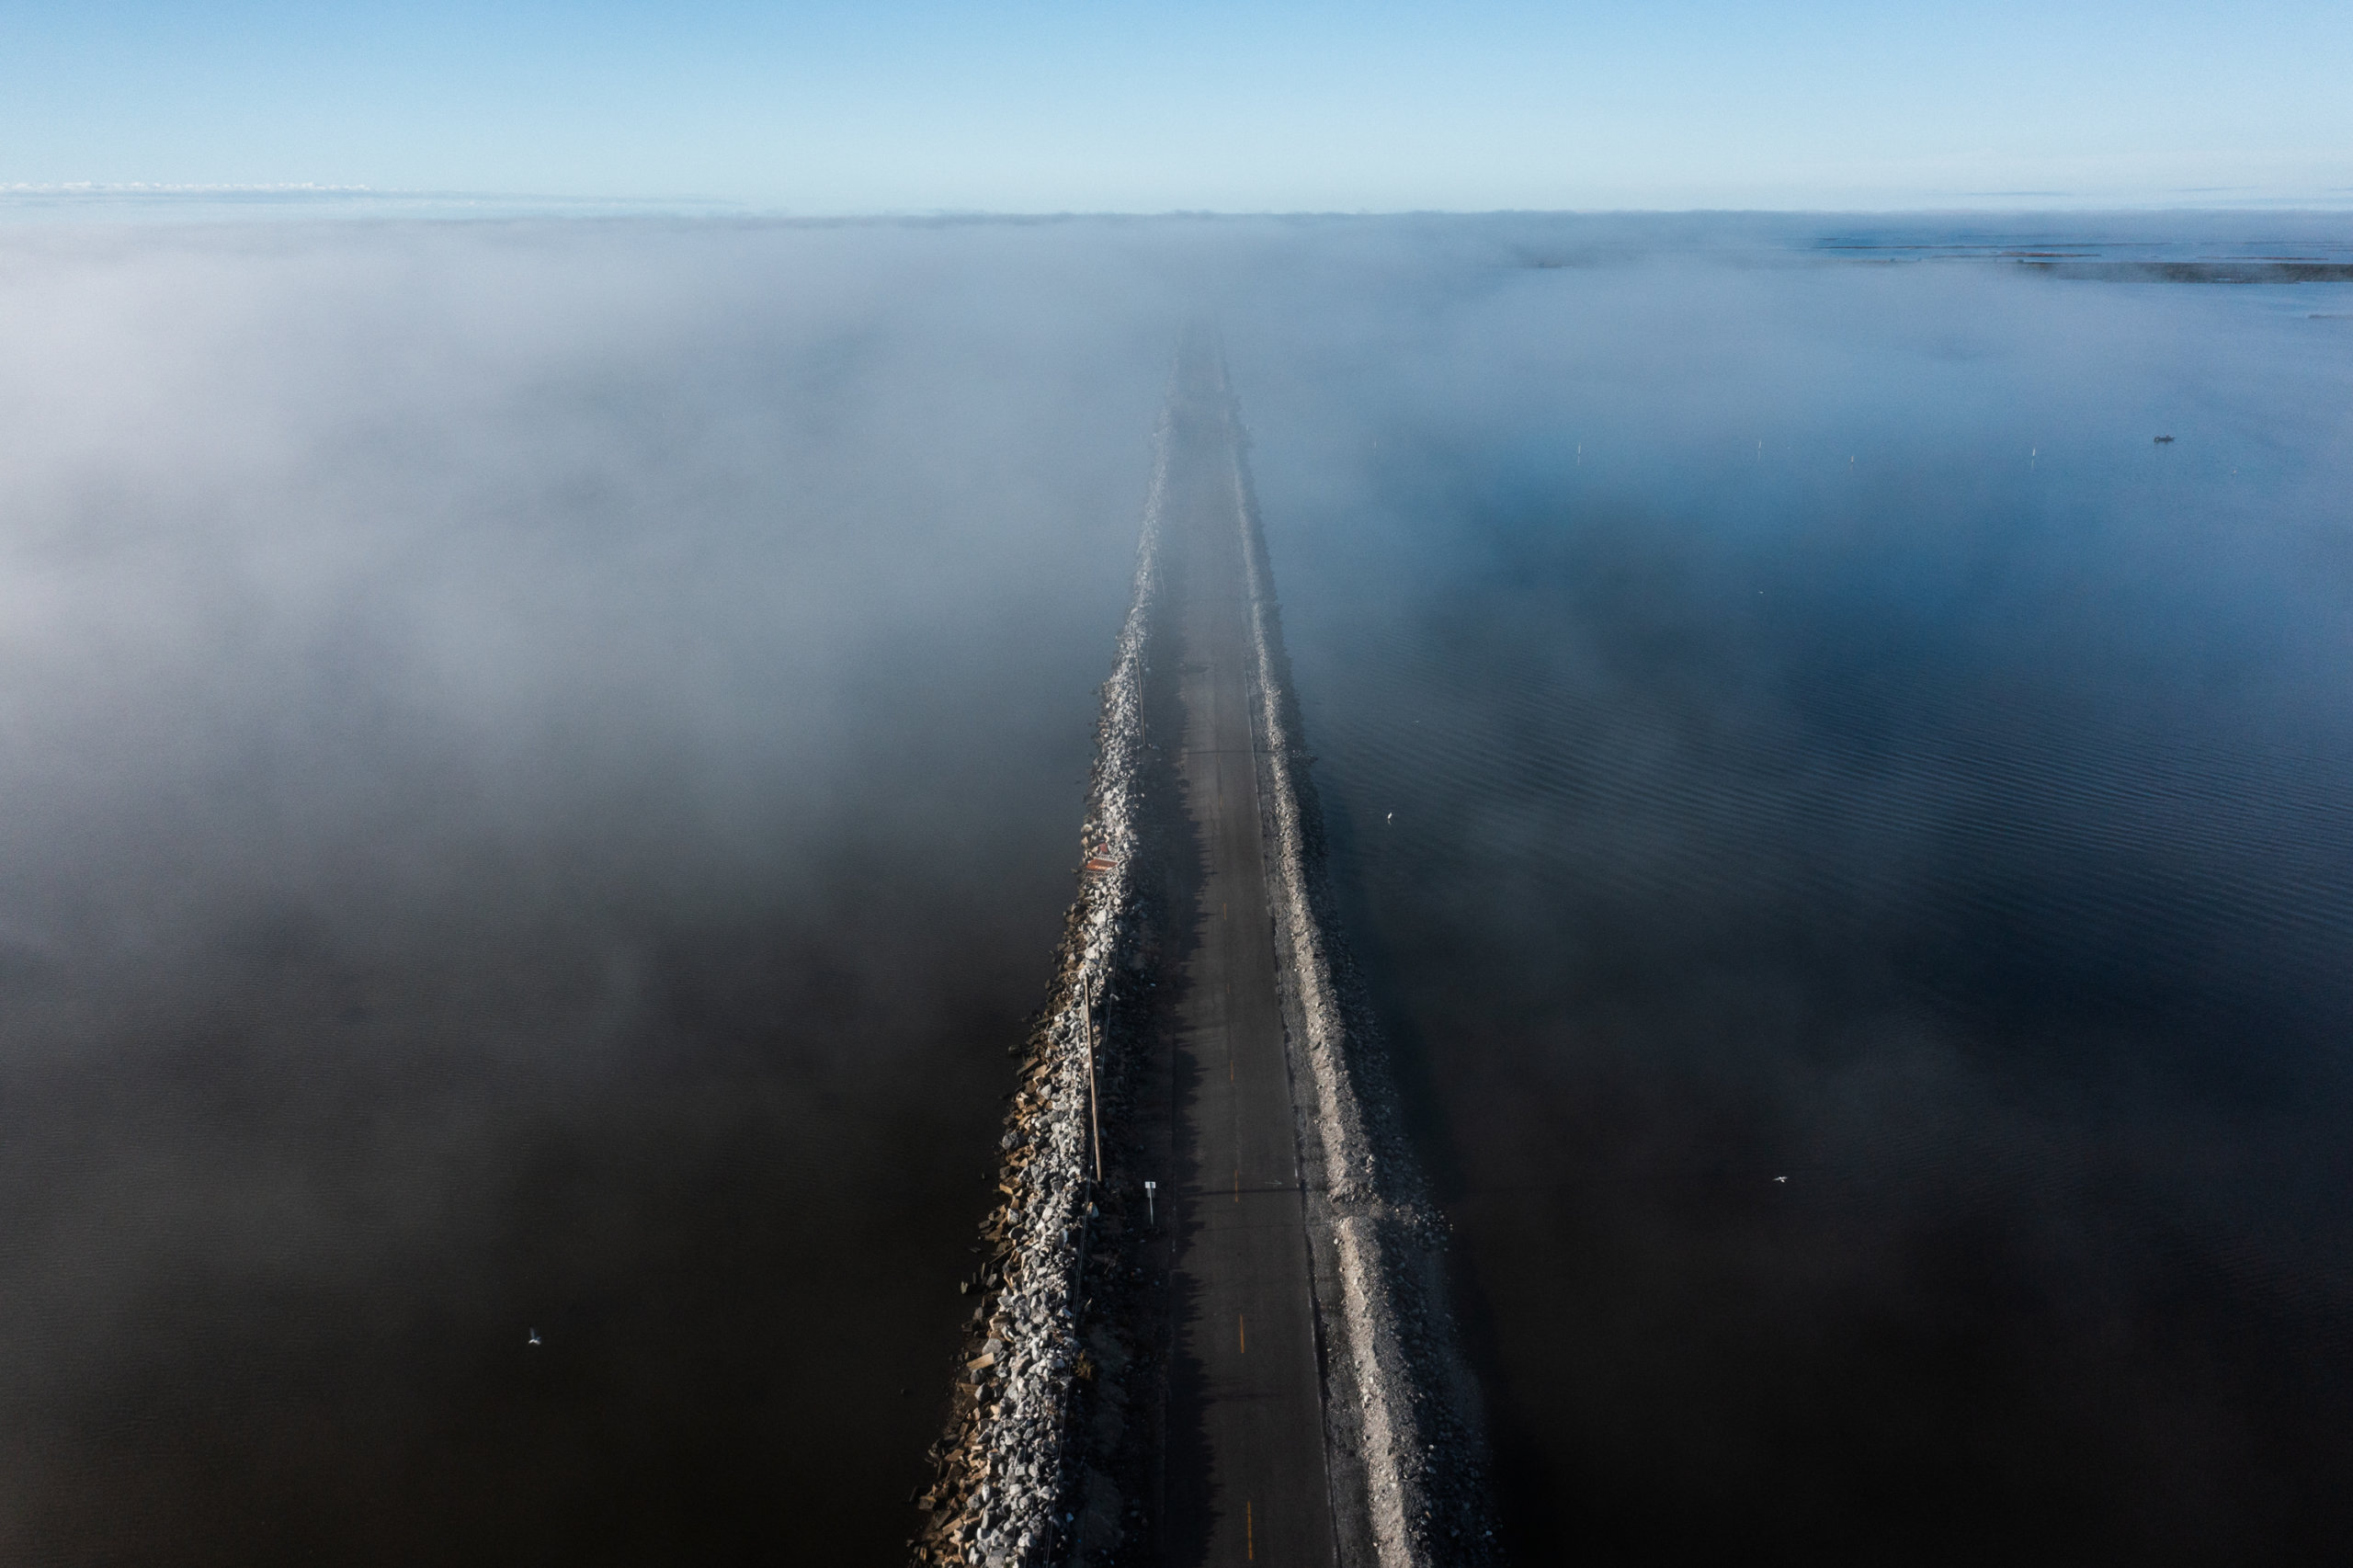 Island Road covered by a thin layer of fog